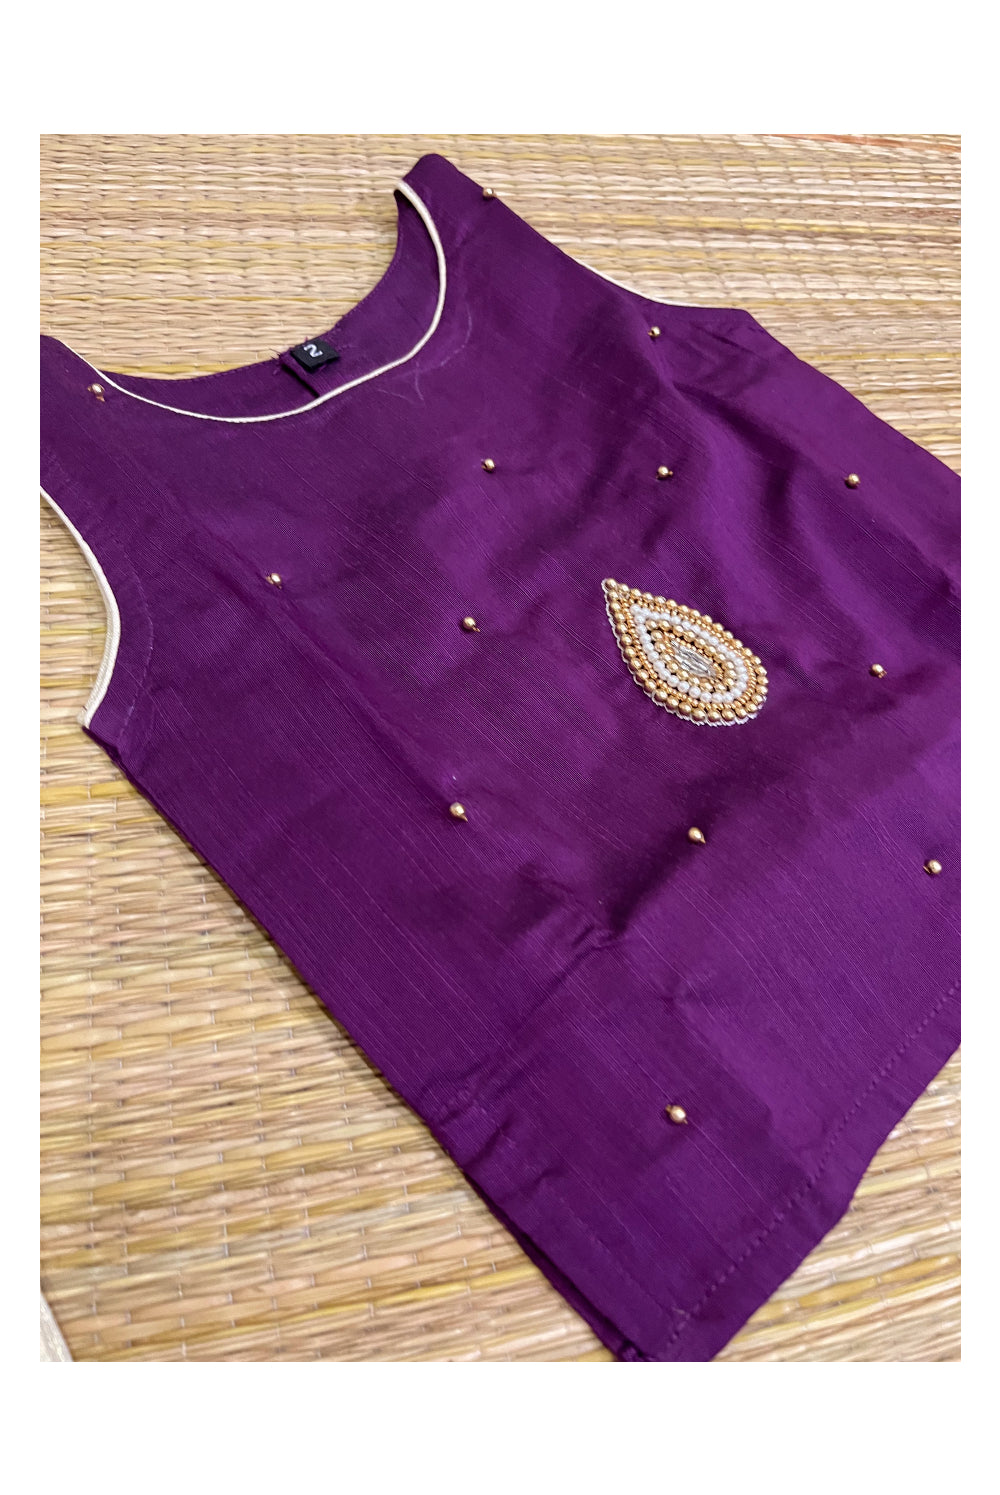 Southloom Kerala Pavada Blouse with Violet Bead Work Design (Age - 4 Year)